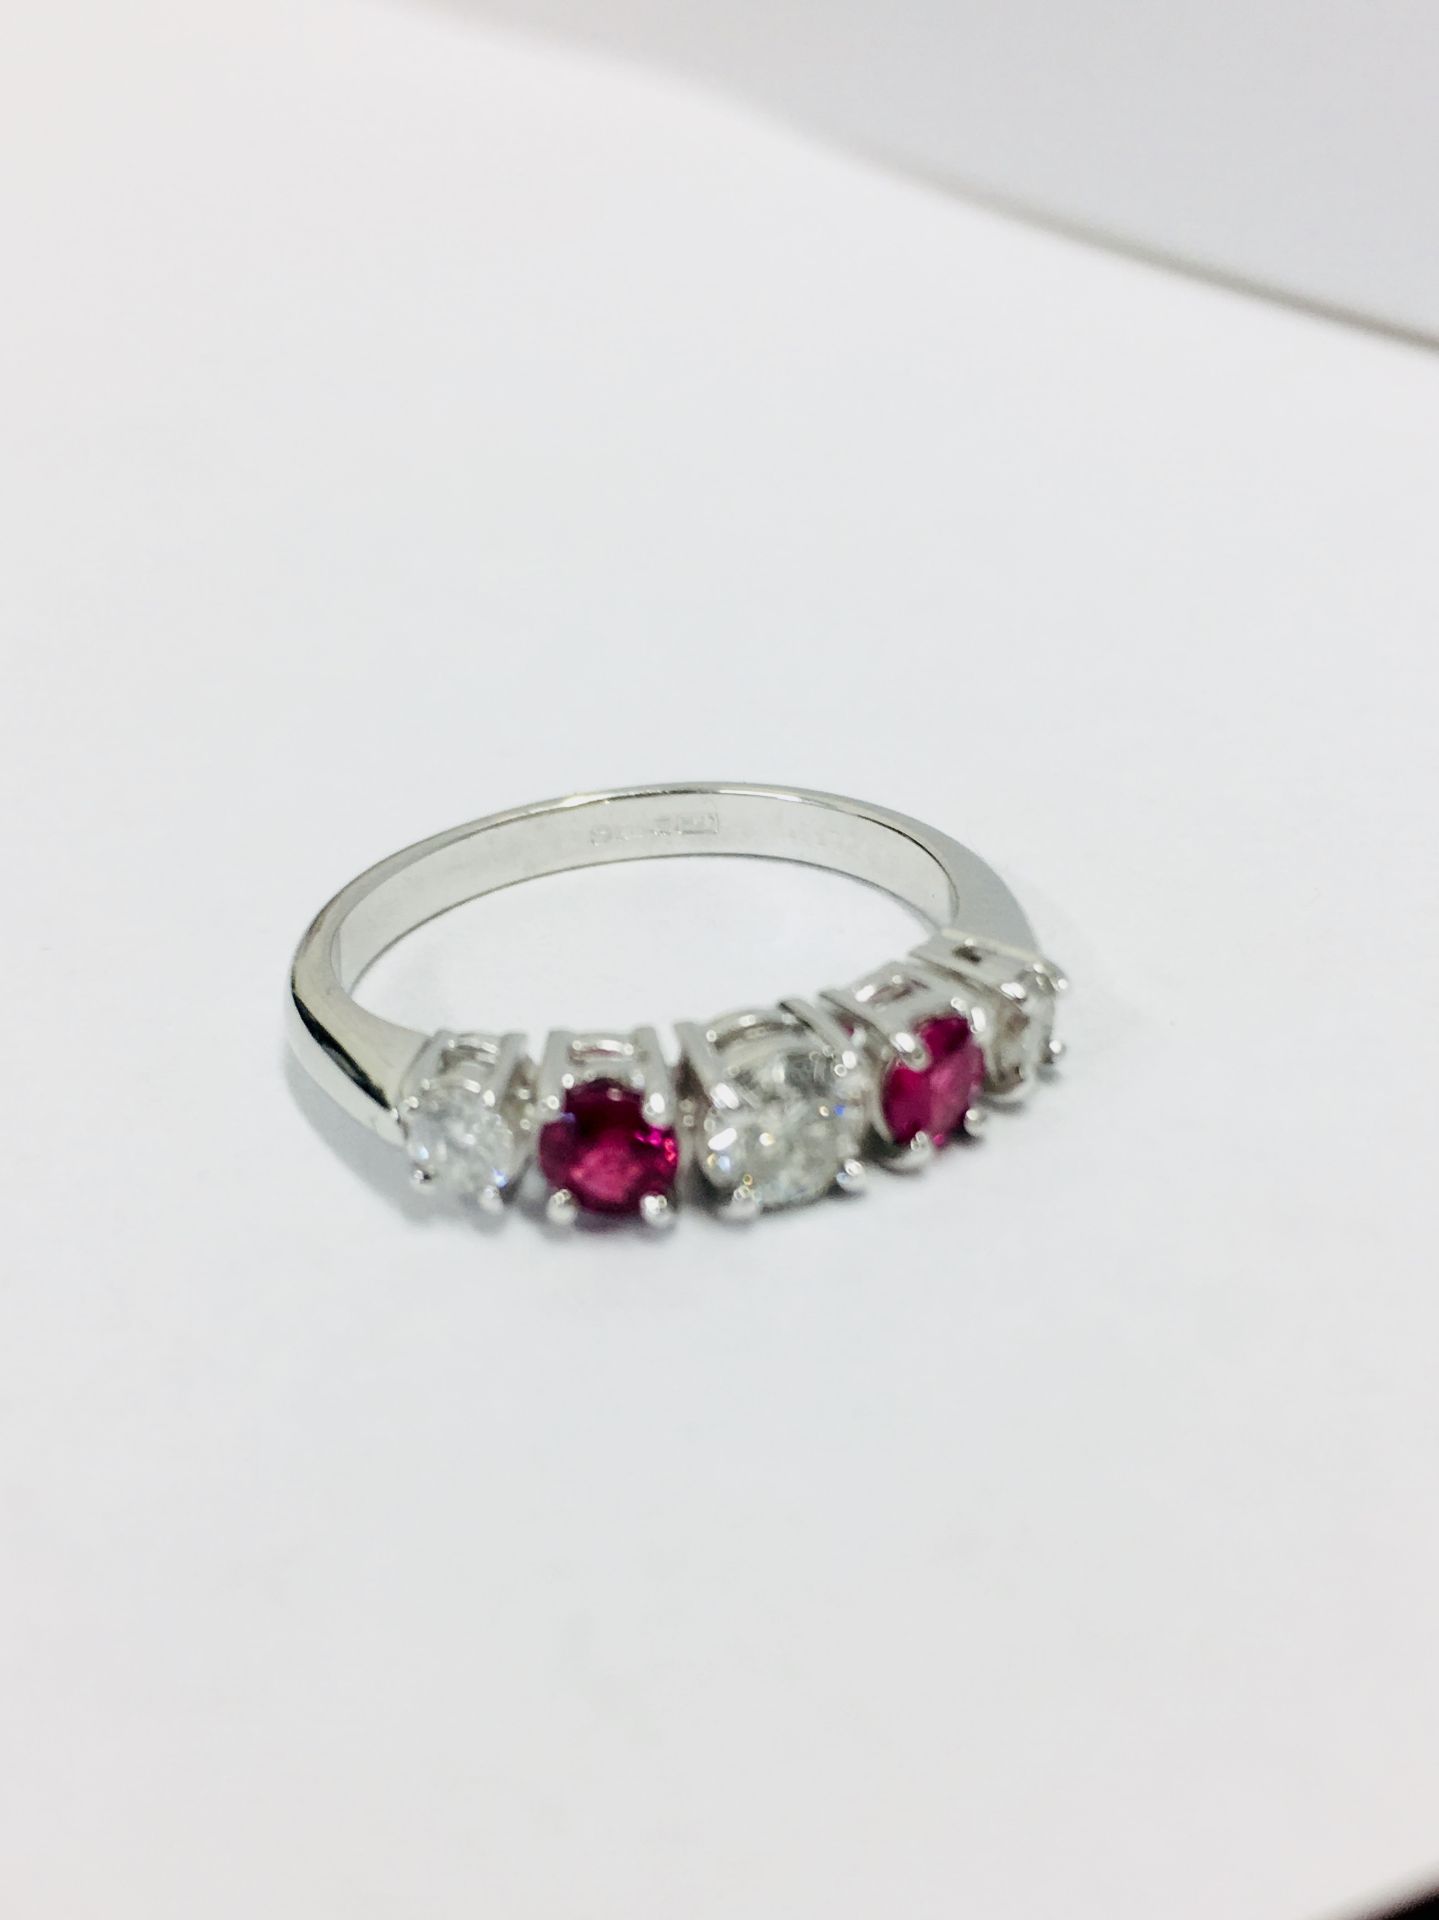 0.75Ct Ruby And Diamond Five Stone Ringset In 18Ct Gold. - Image 7 of 7